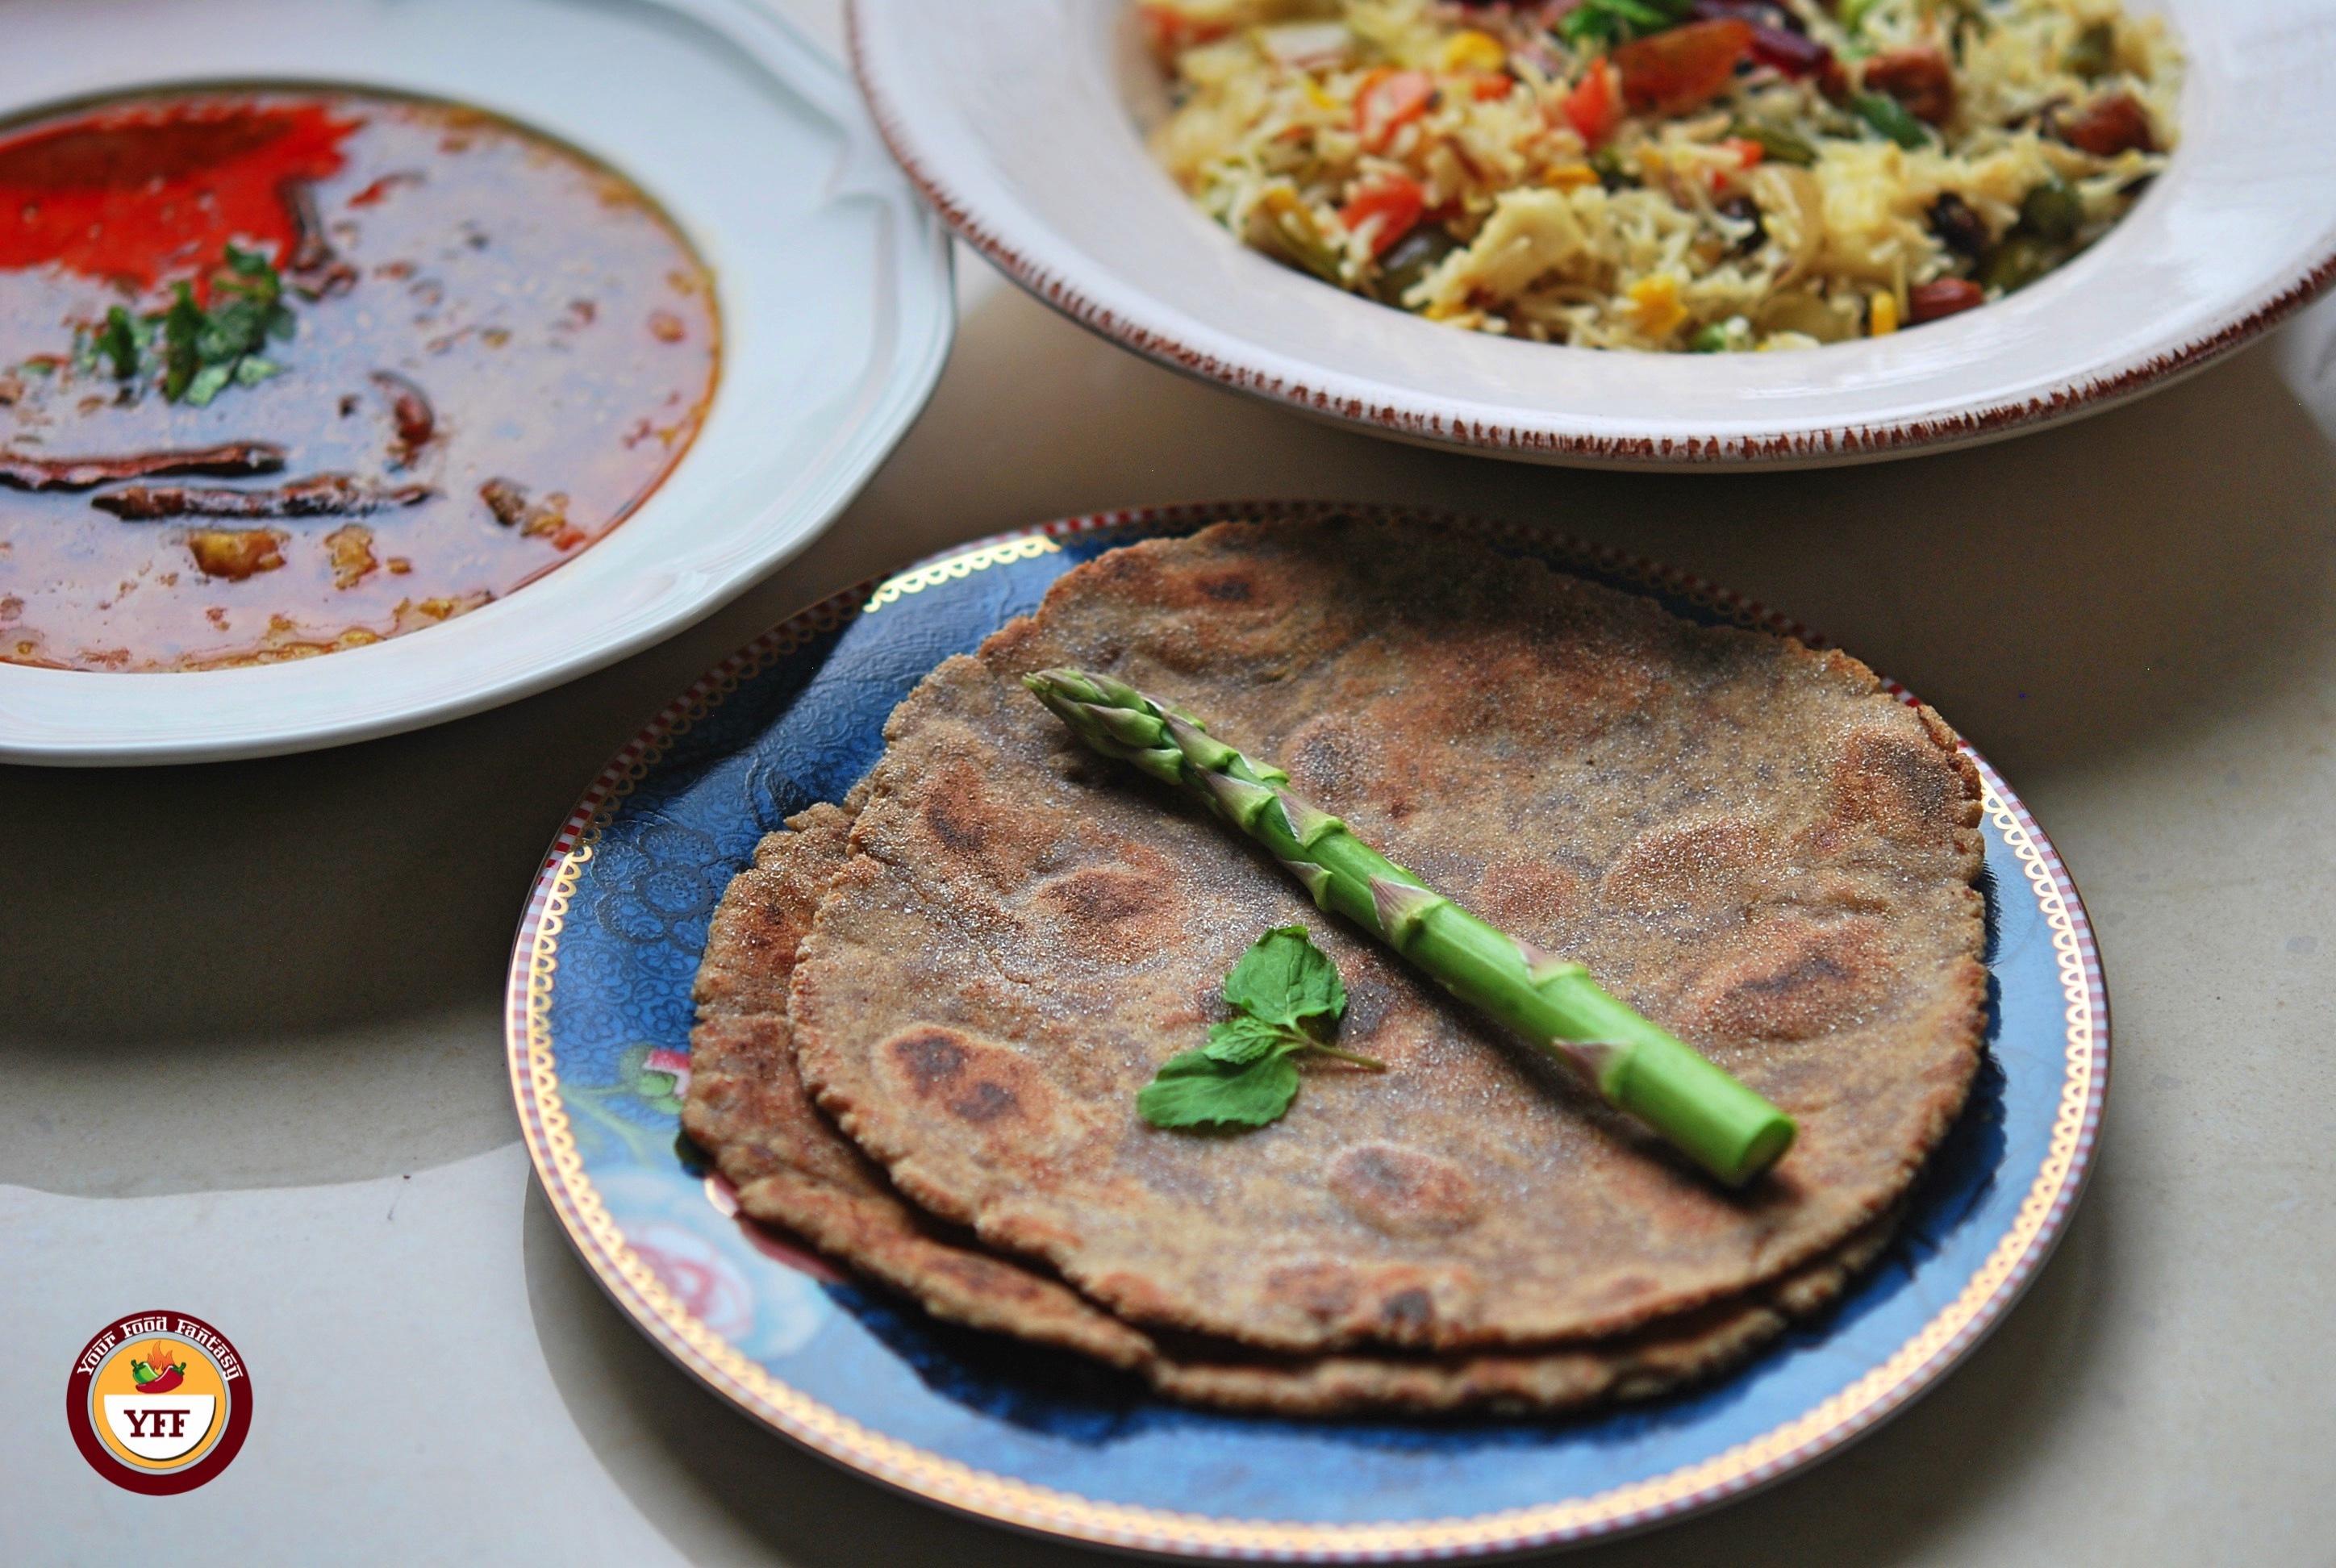 Meal Combo of Amaranth Flour paratha with Dal and Pulao - Your Food Fantasy